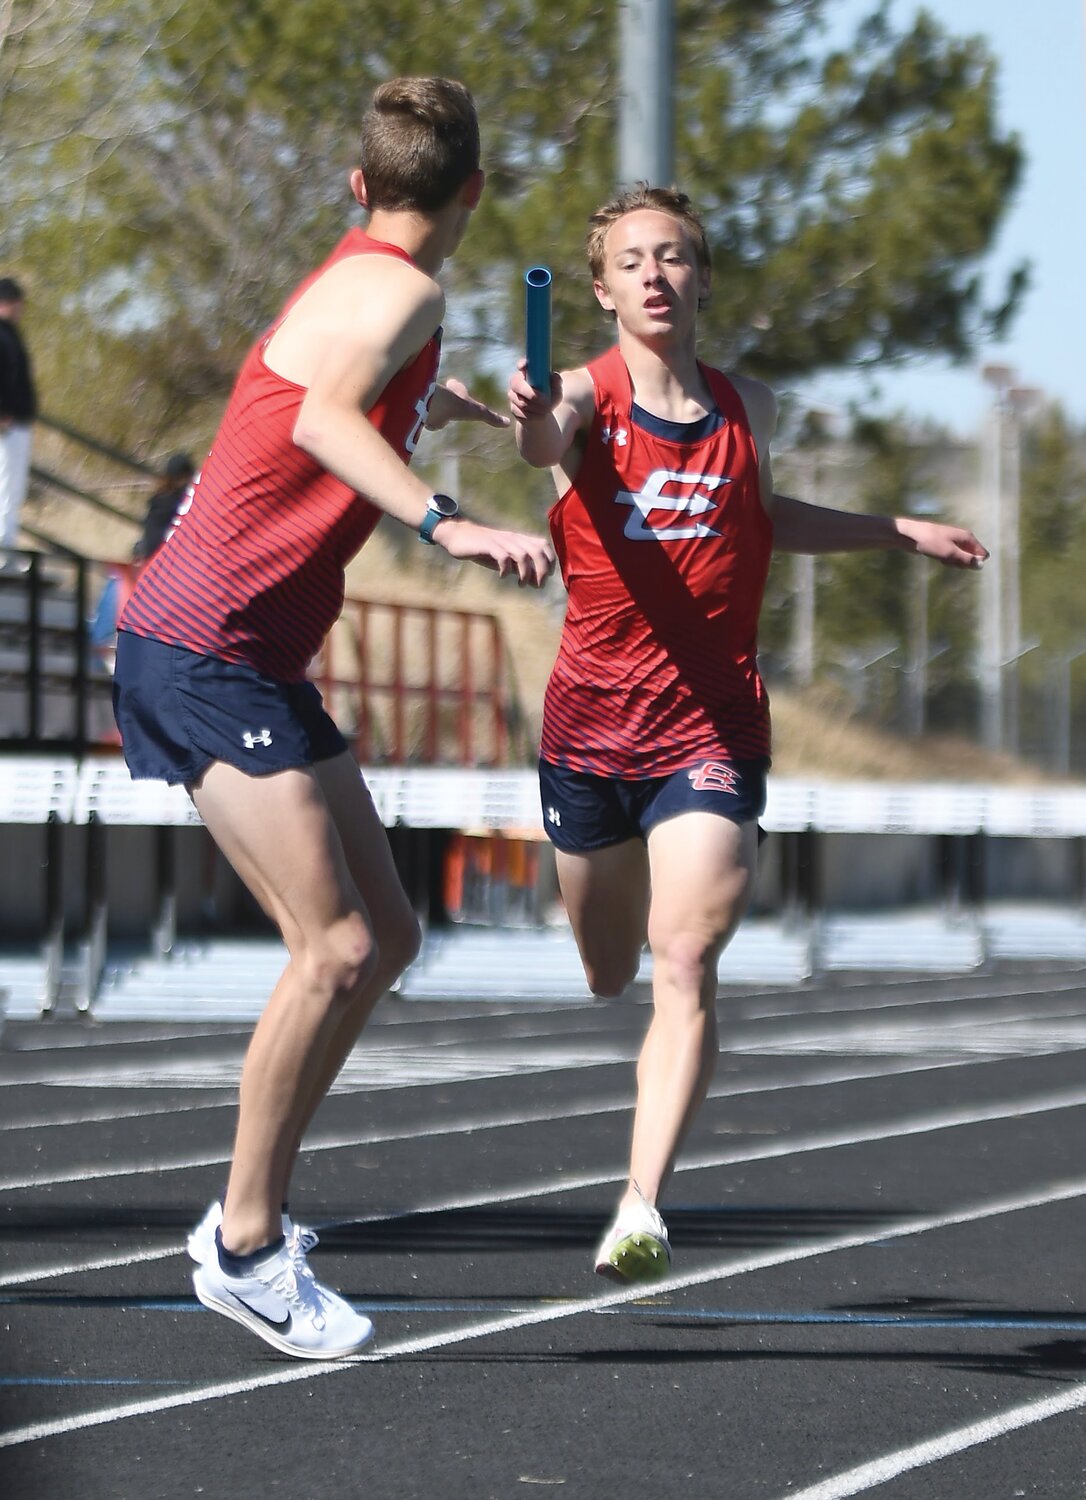 Aidan Conrad hands the baton off to Paul Baxter during the 4x800 Saturday at the 4A West Regional Meet in Rock Springs.